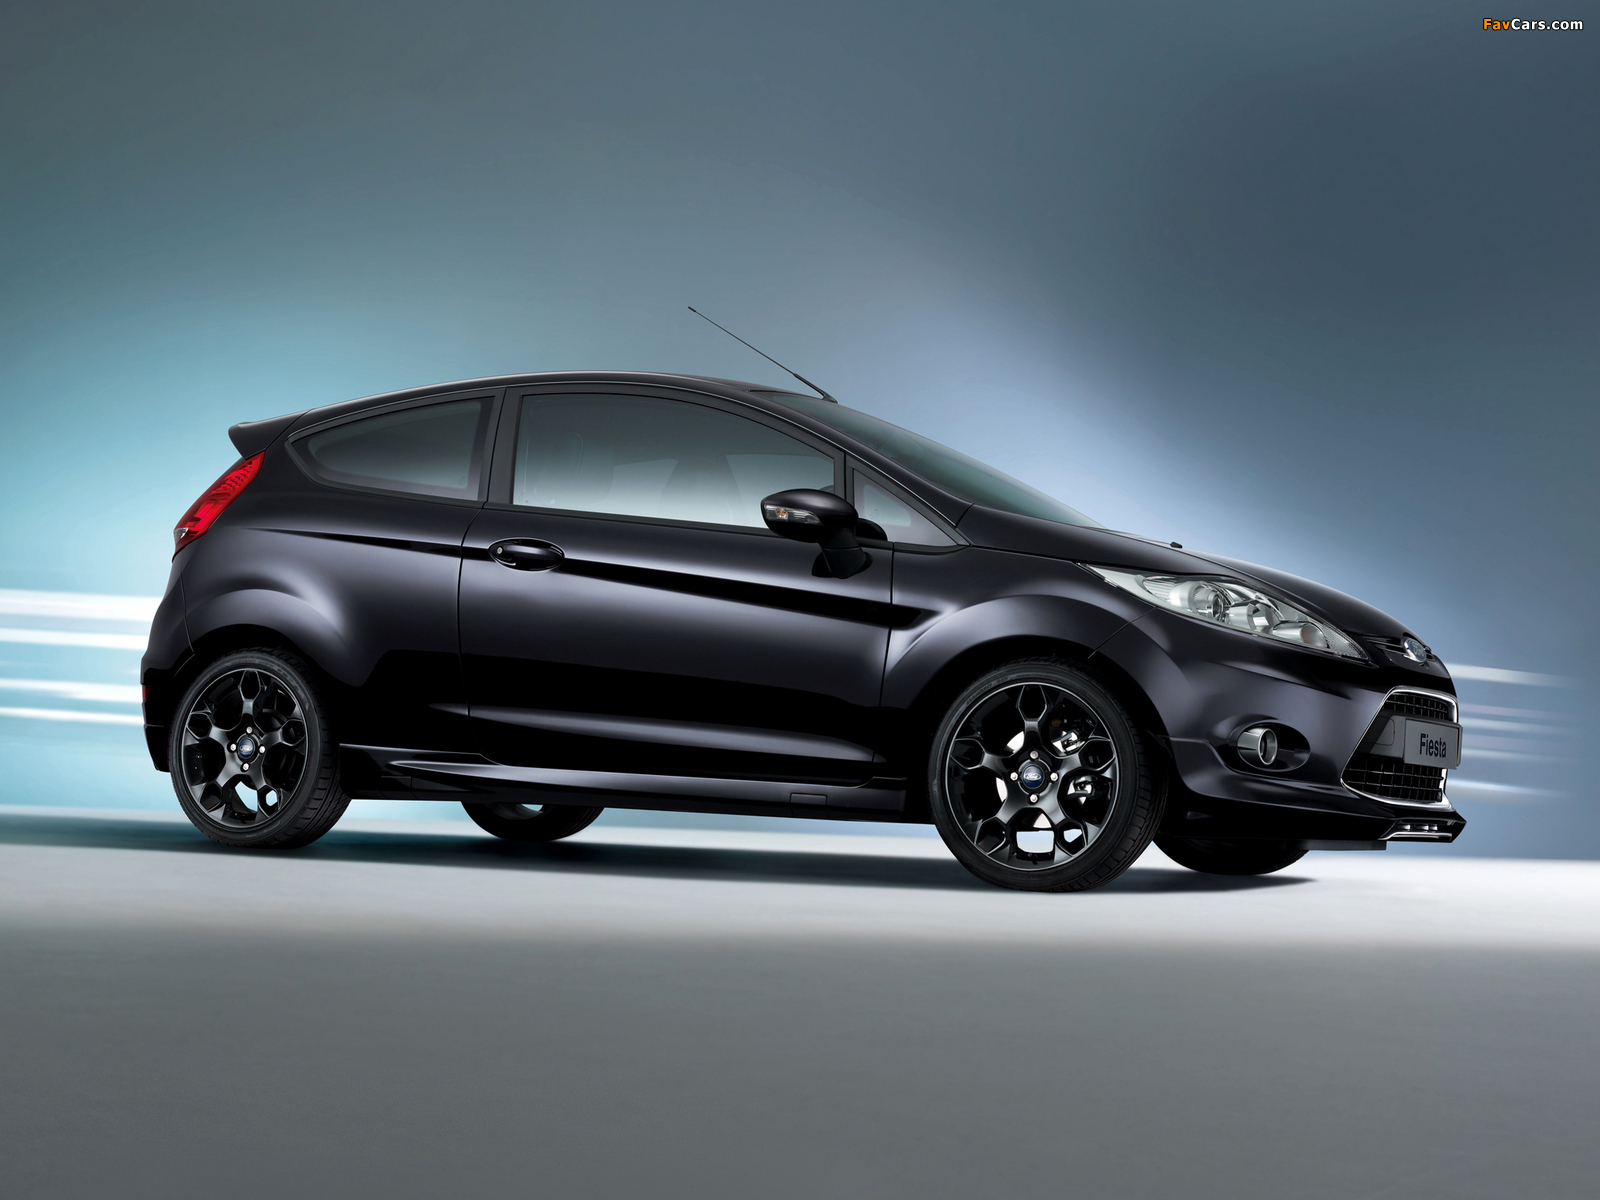 Ford Fiesta Metal 2011 pictures (1600 x 1200)